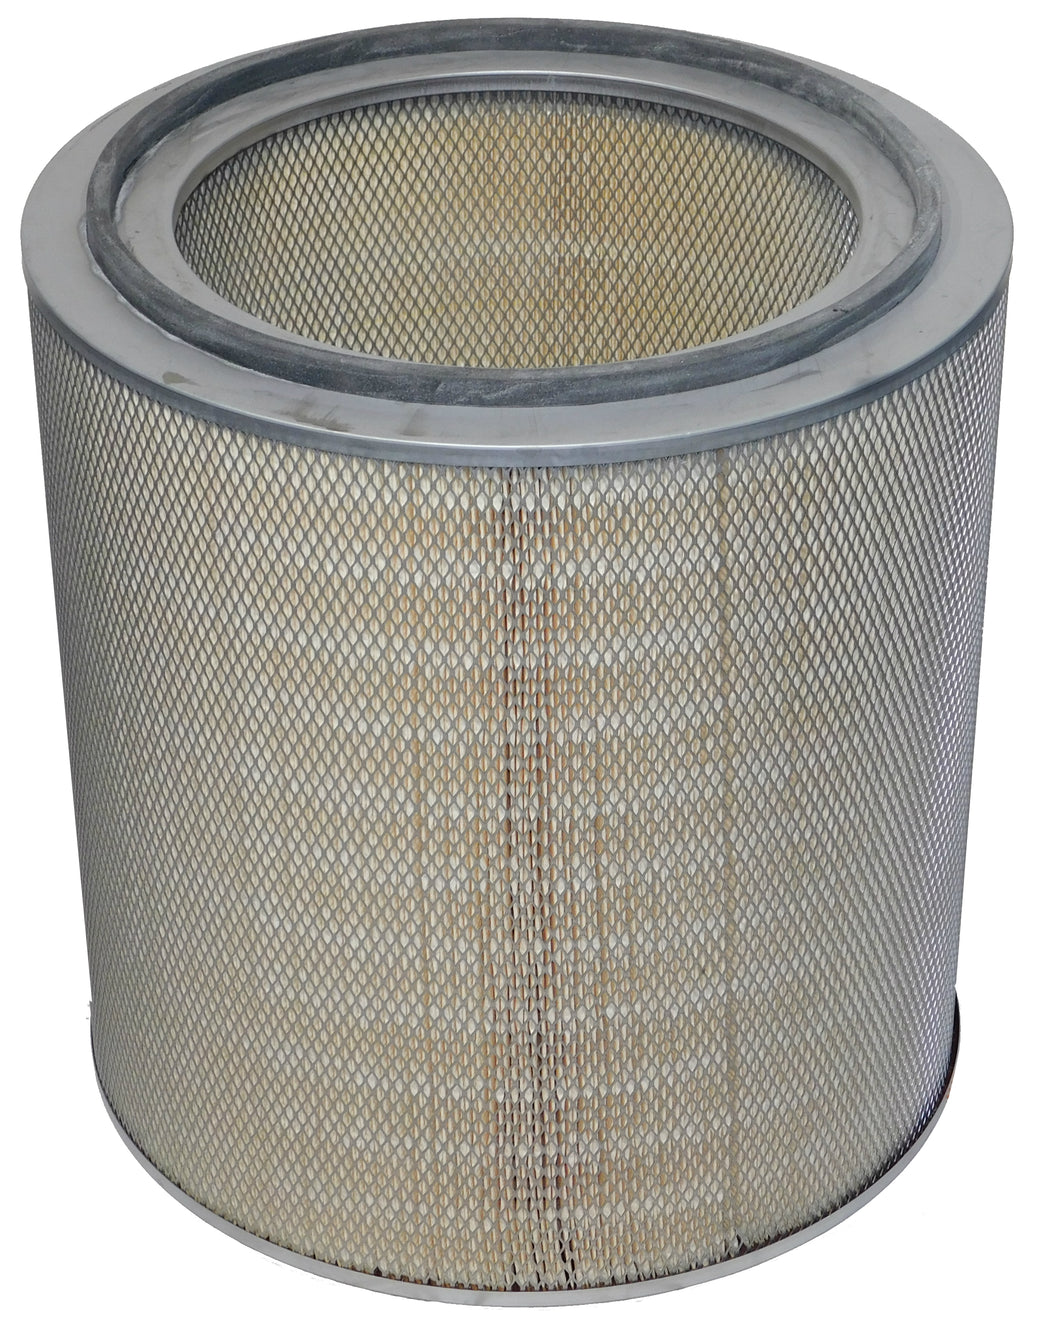 G82-7155 - Guardian - OEM Replacement Filter